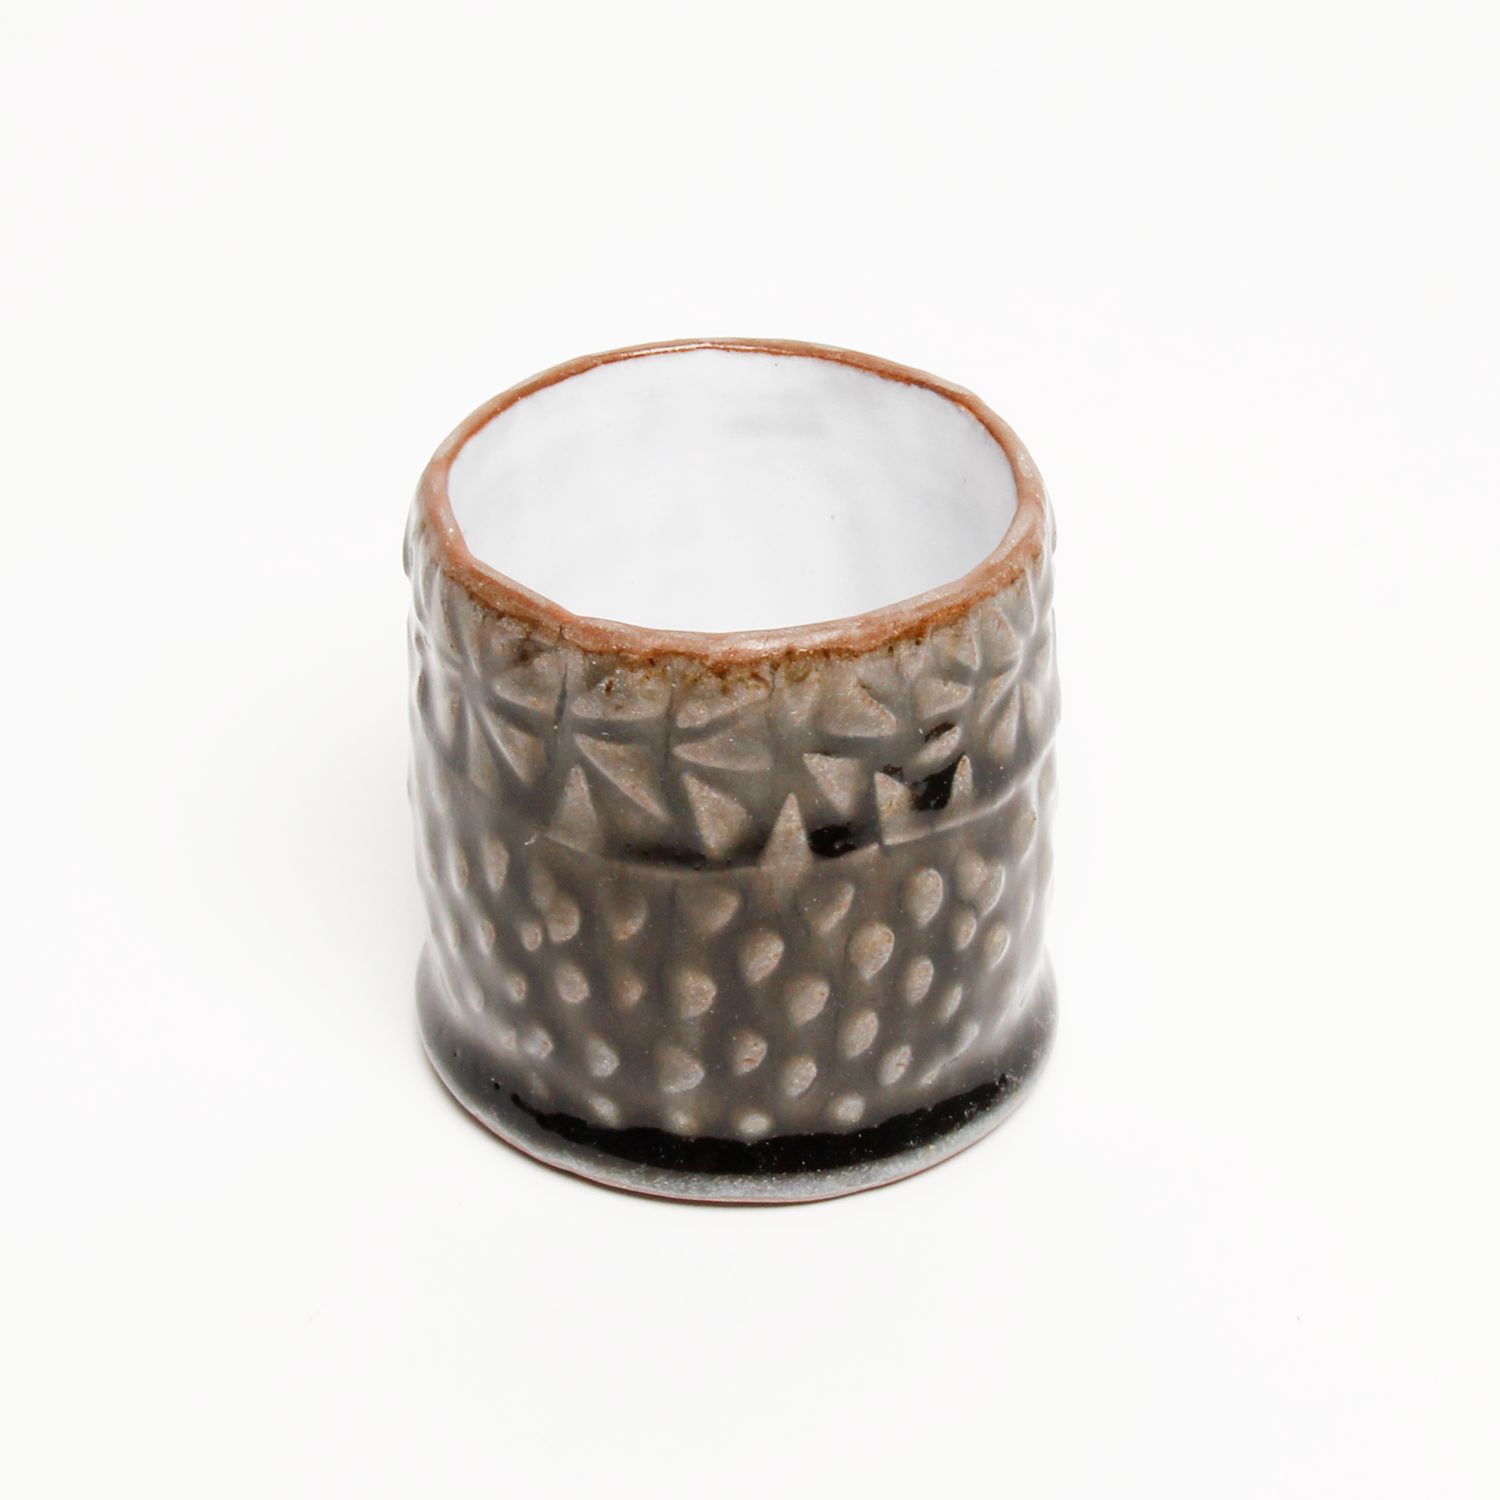 Jacquie Blondin: Textured Slab Cup Product Image 2 of 2